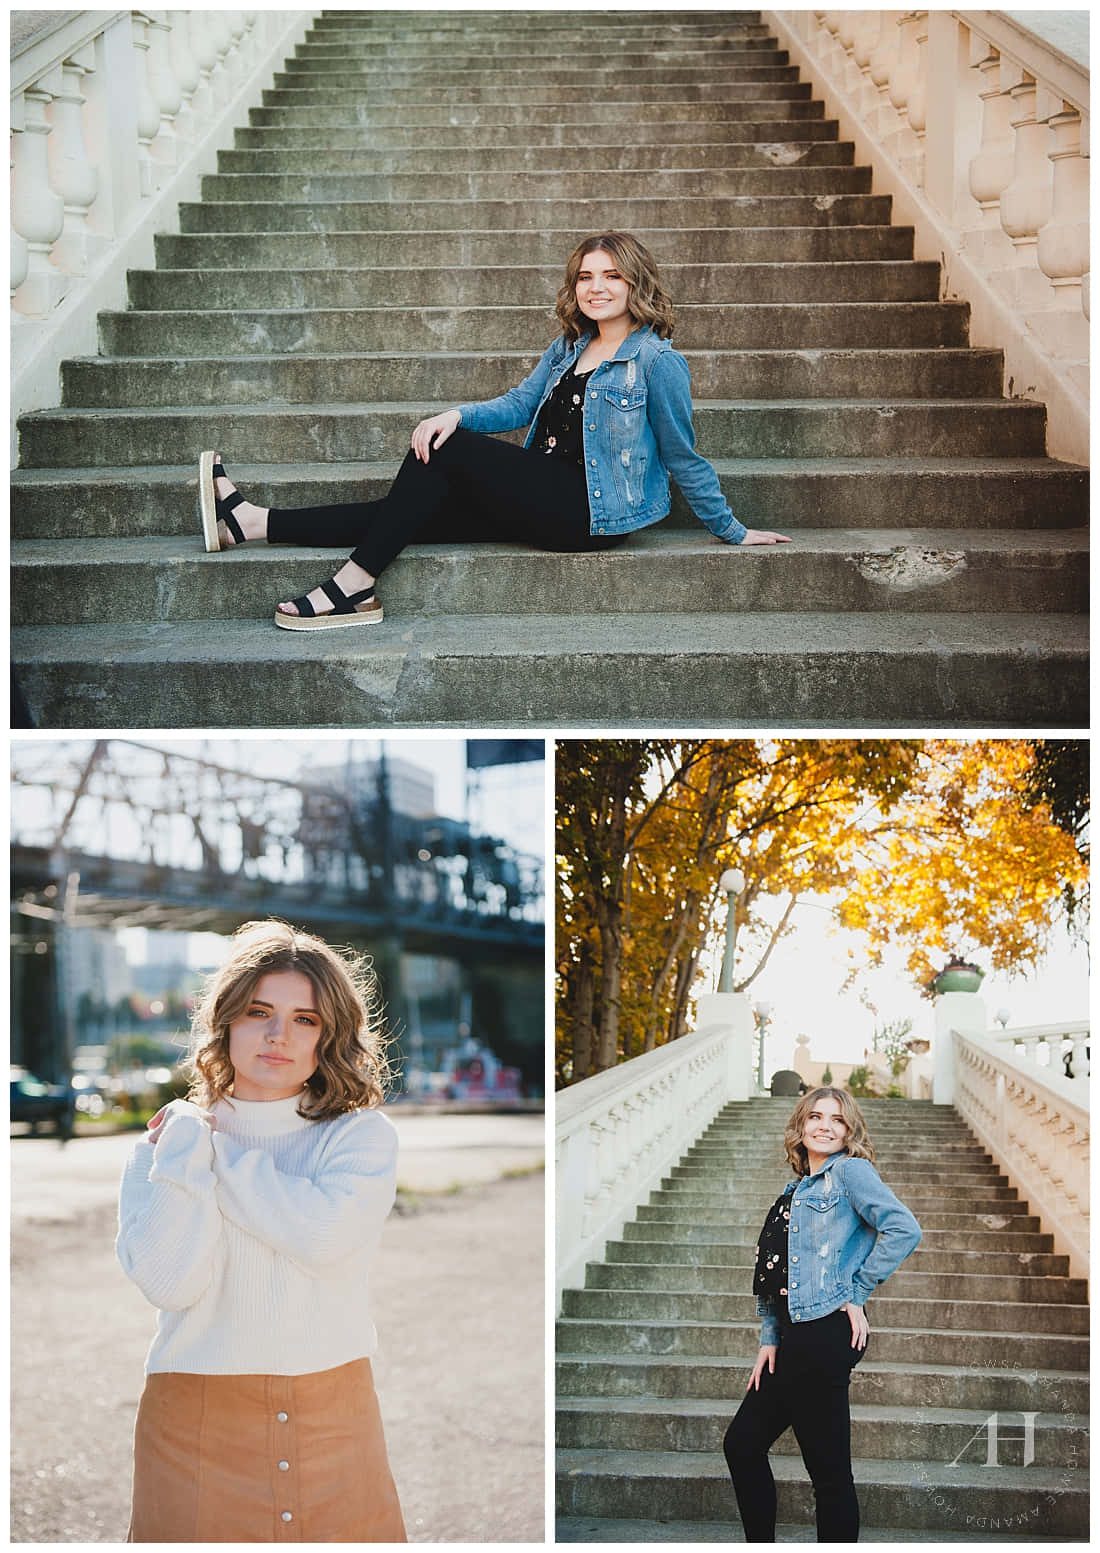 Capture life's moments with a Fall Senior Photoshoot